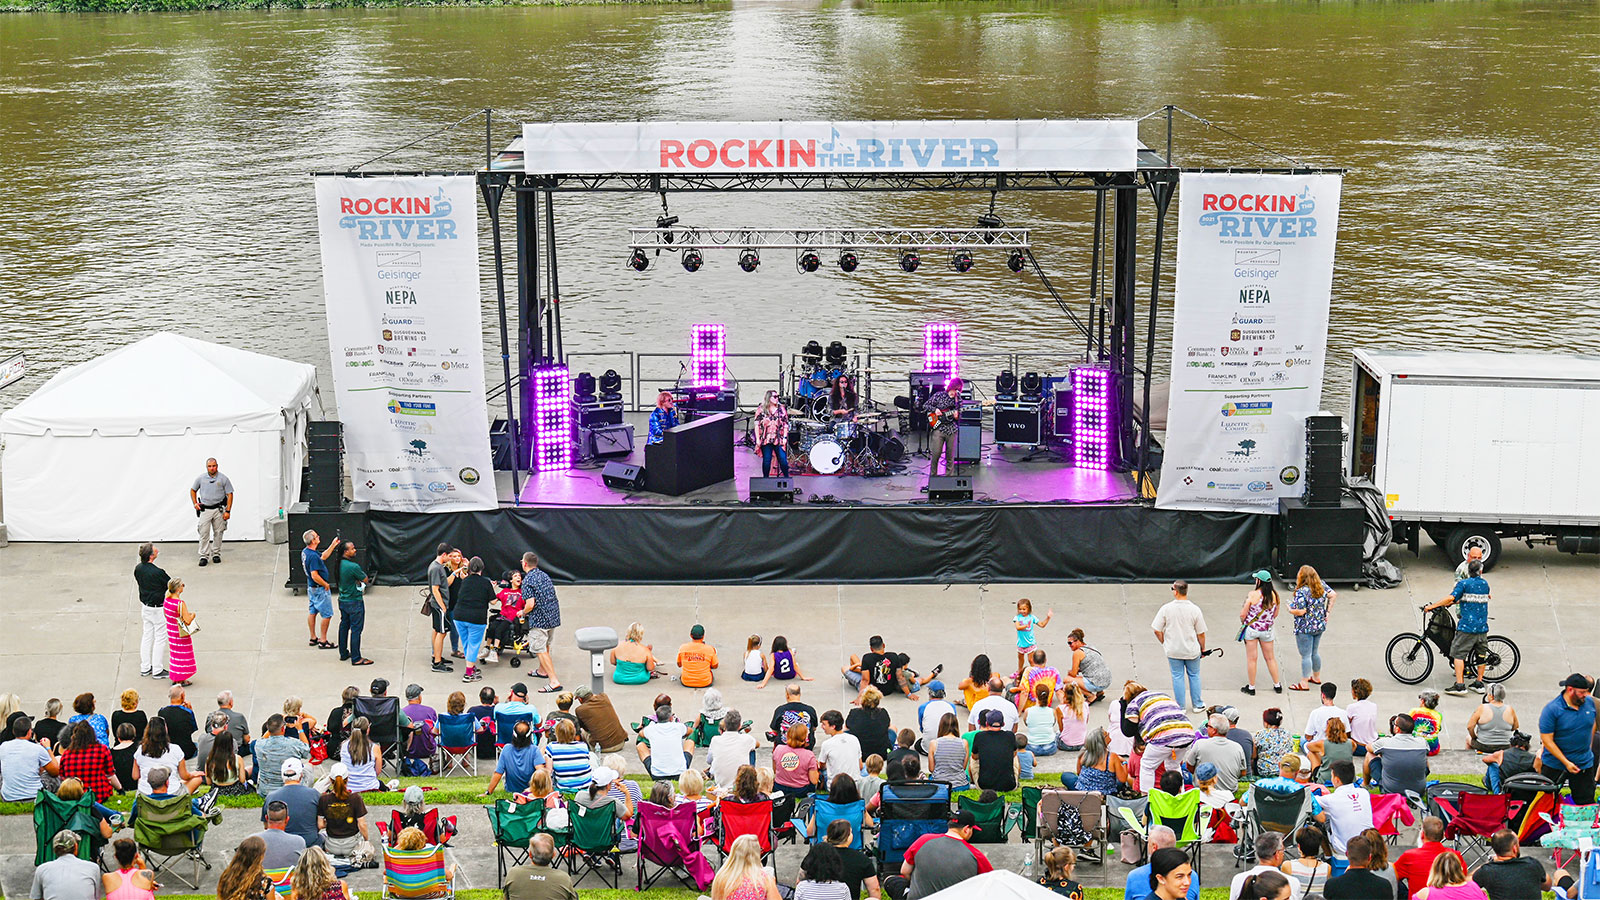 Picture This: Rockin’ the River Kicks Off 2021 Concert Series | DiscoverNEPA